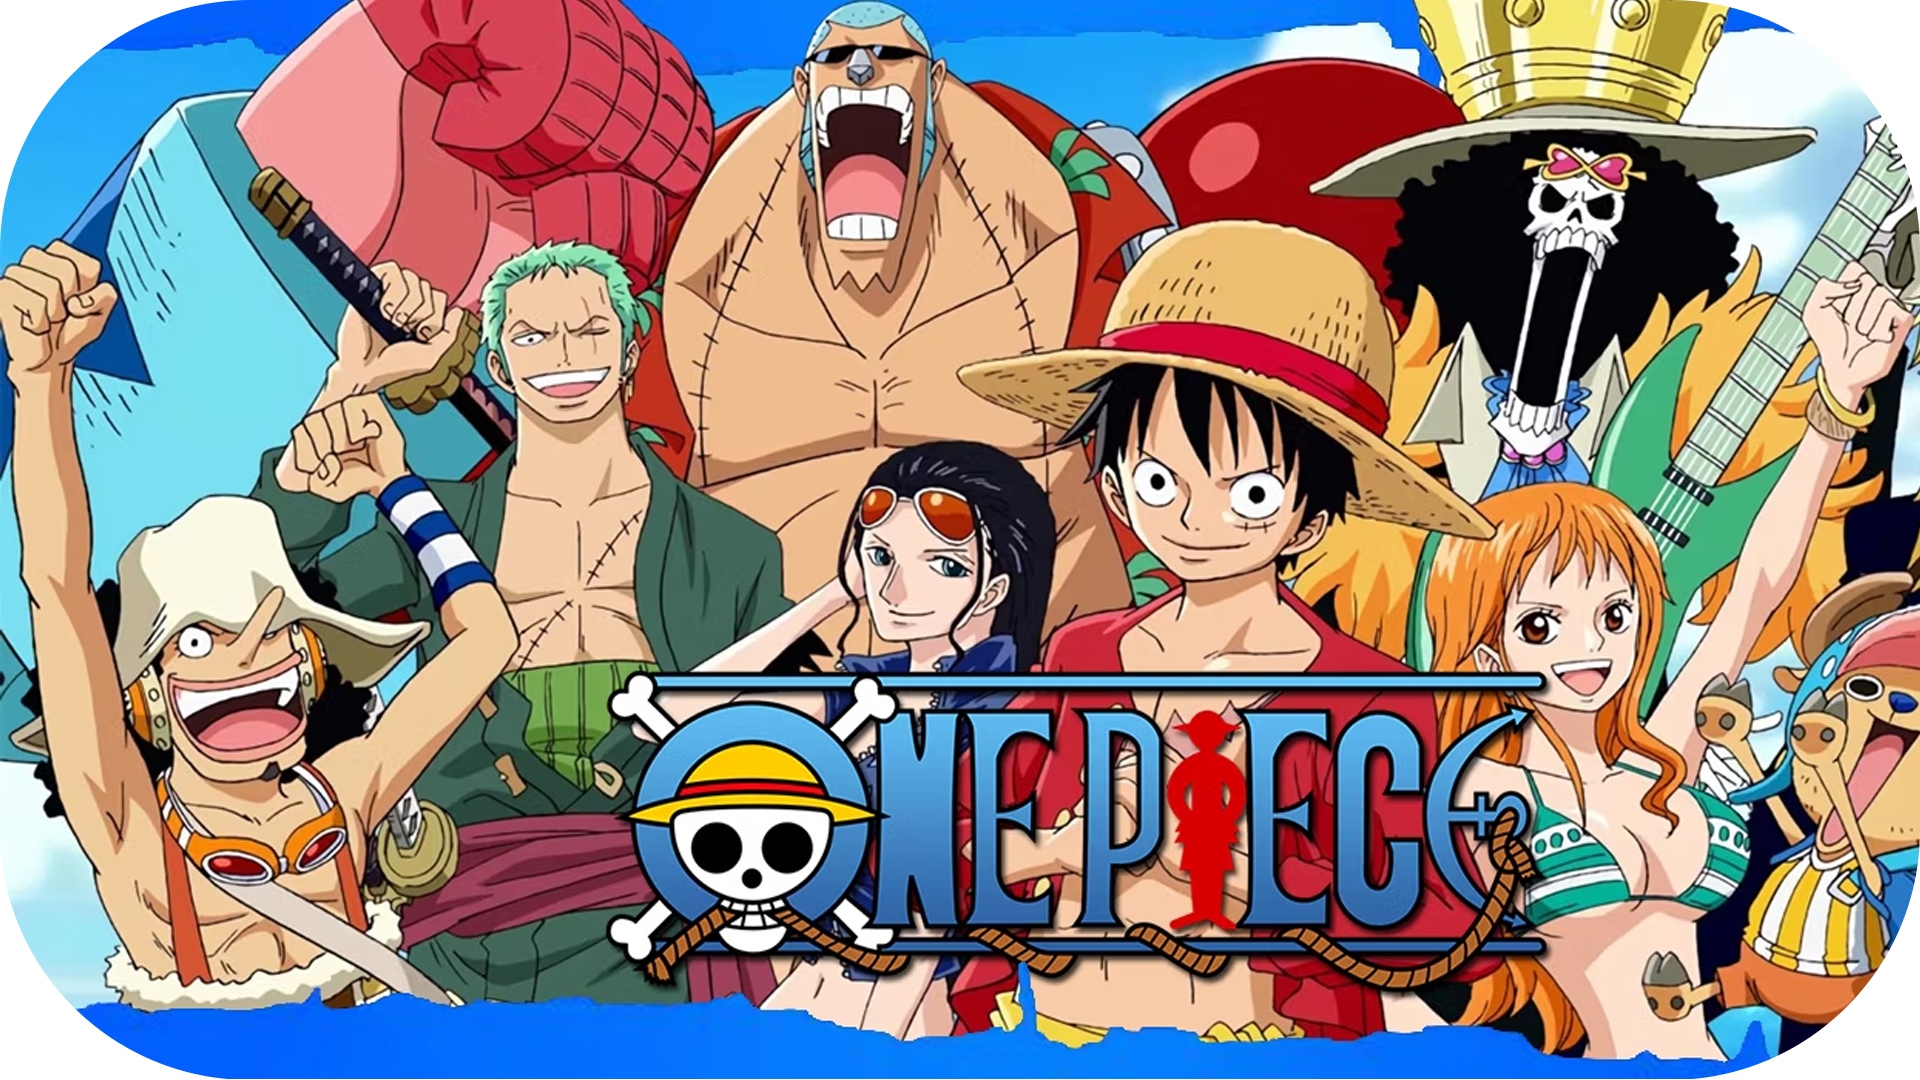 ONE PIECE EPISODE 1015 TWIXTORED CLIPS 